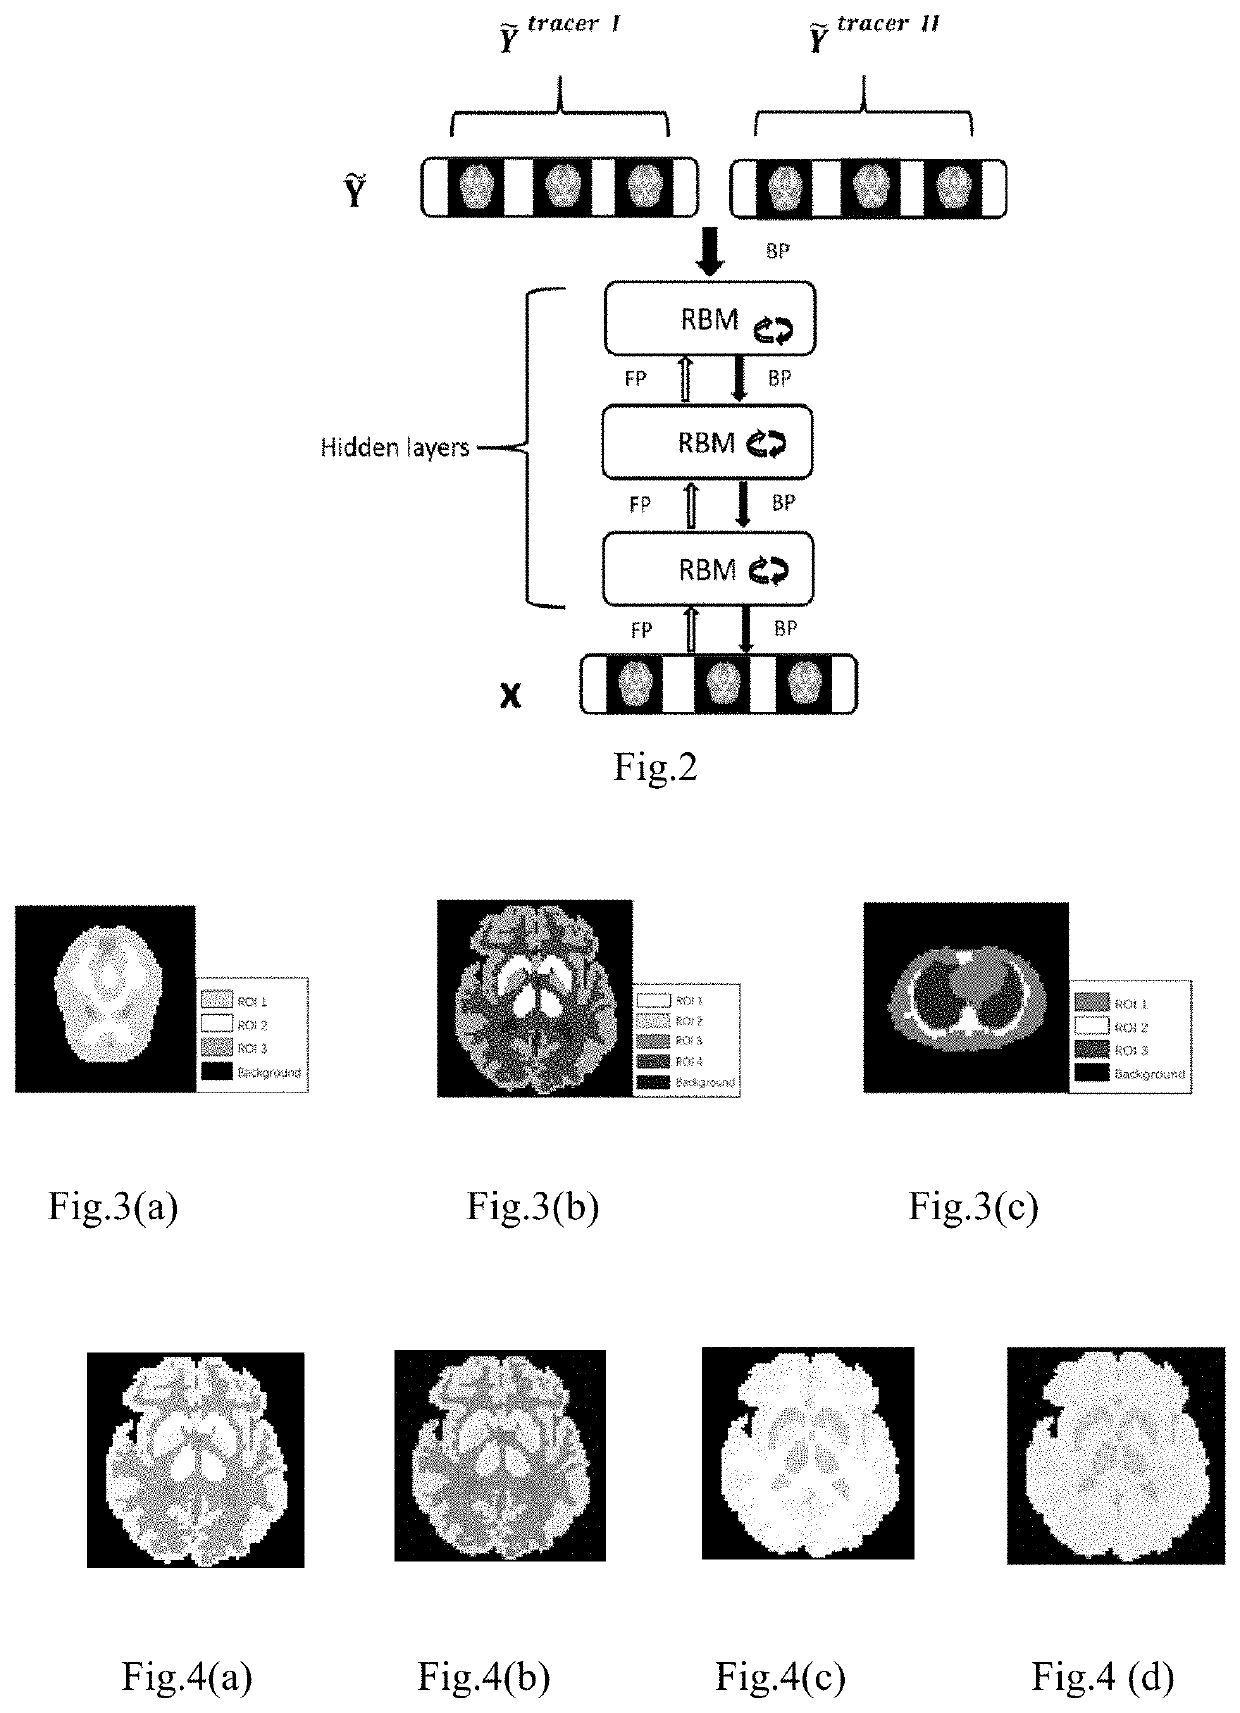 Deep-learning based separation method of a mixture of dual-tracer single-acquisition pet signals with equal half-lives